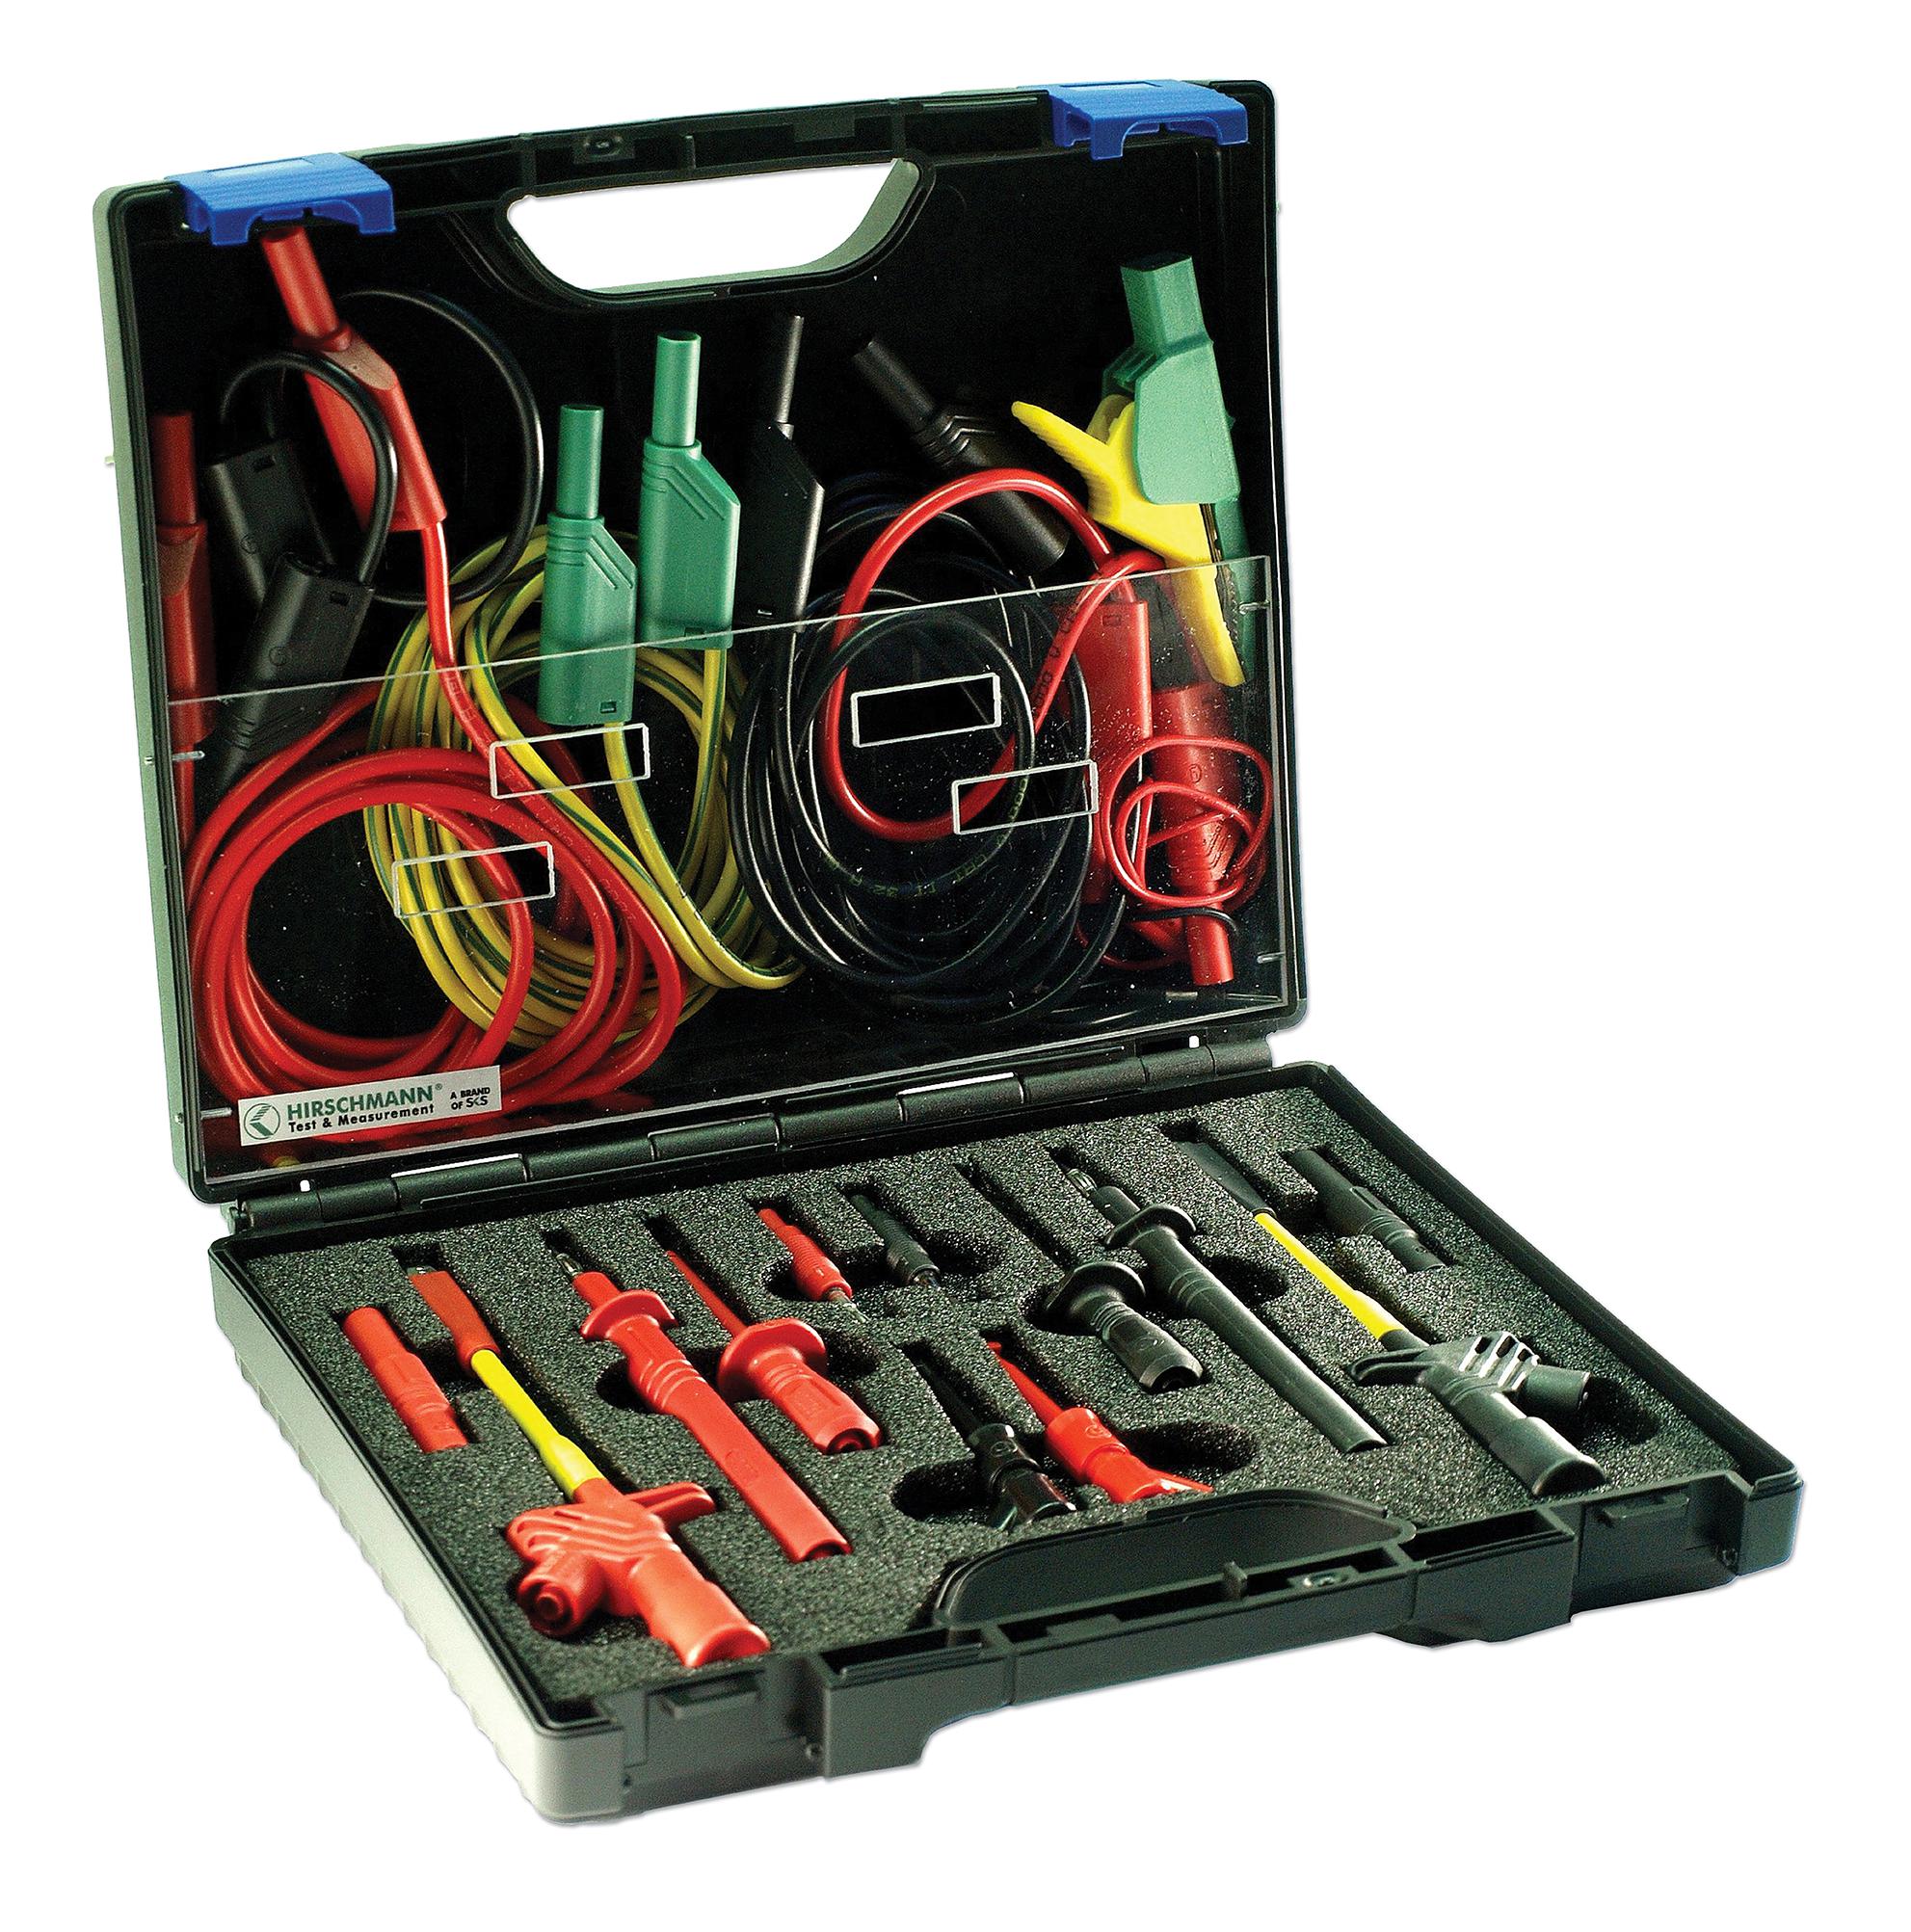 932792001 TEST LEAD KIT, ELECTRICAL HIRSCHMANN TEST AND MEASUREMENT